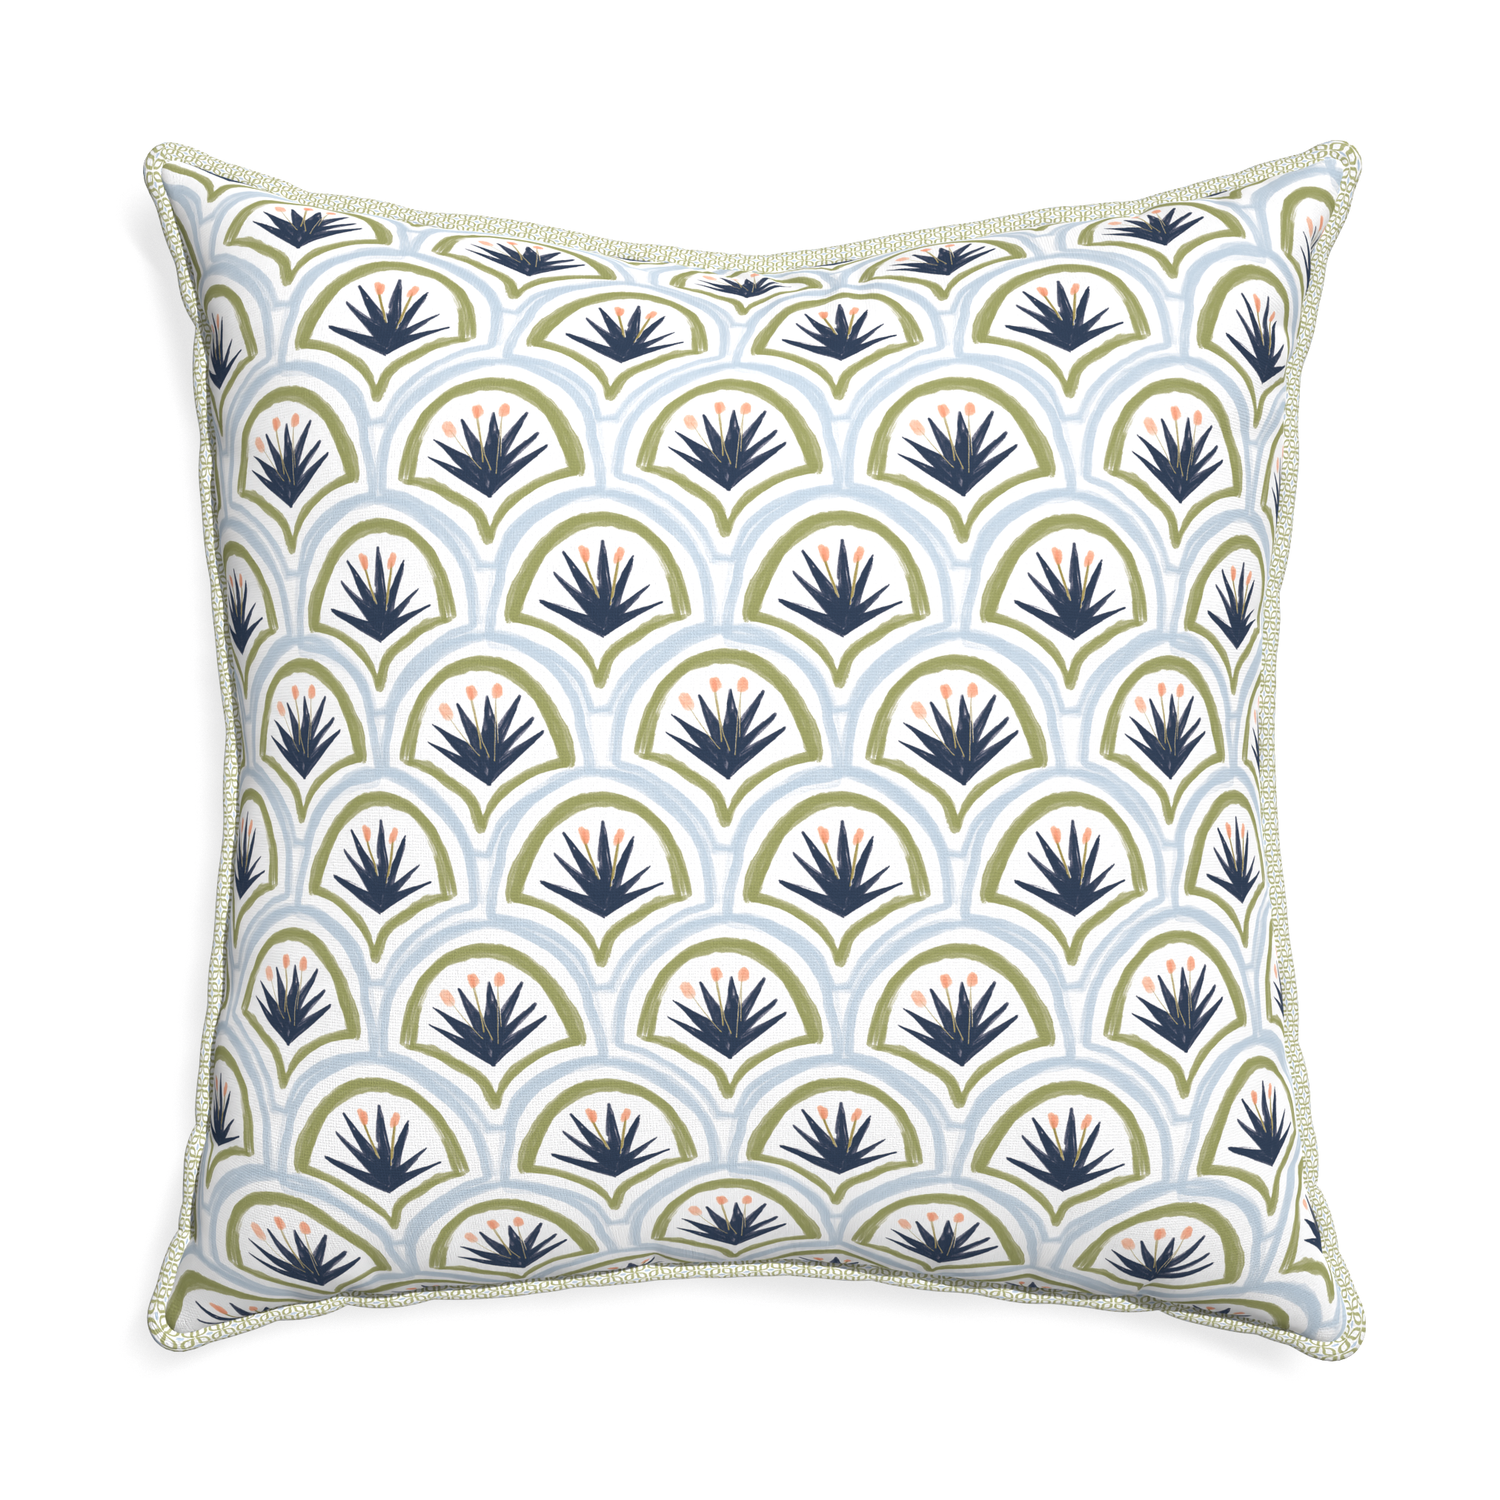 Euro-sham thatcher midnight custom art deco palm patternpillow with l piping on white background